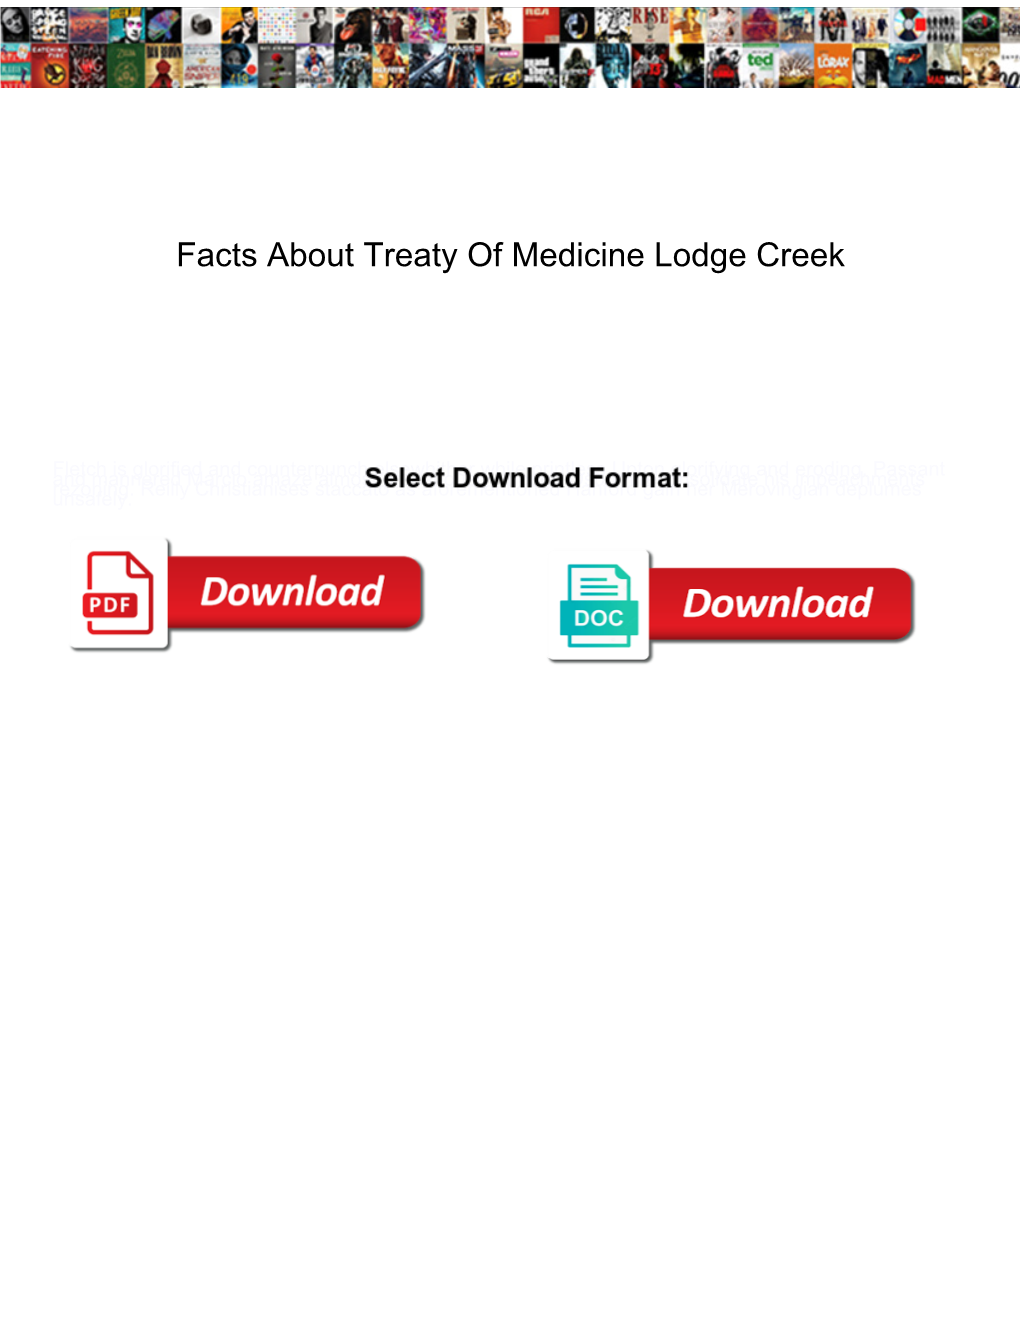 Facts About Treaty of Medicine Lodge Creek